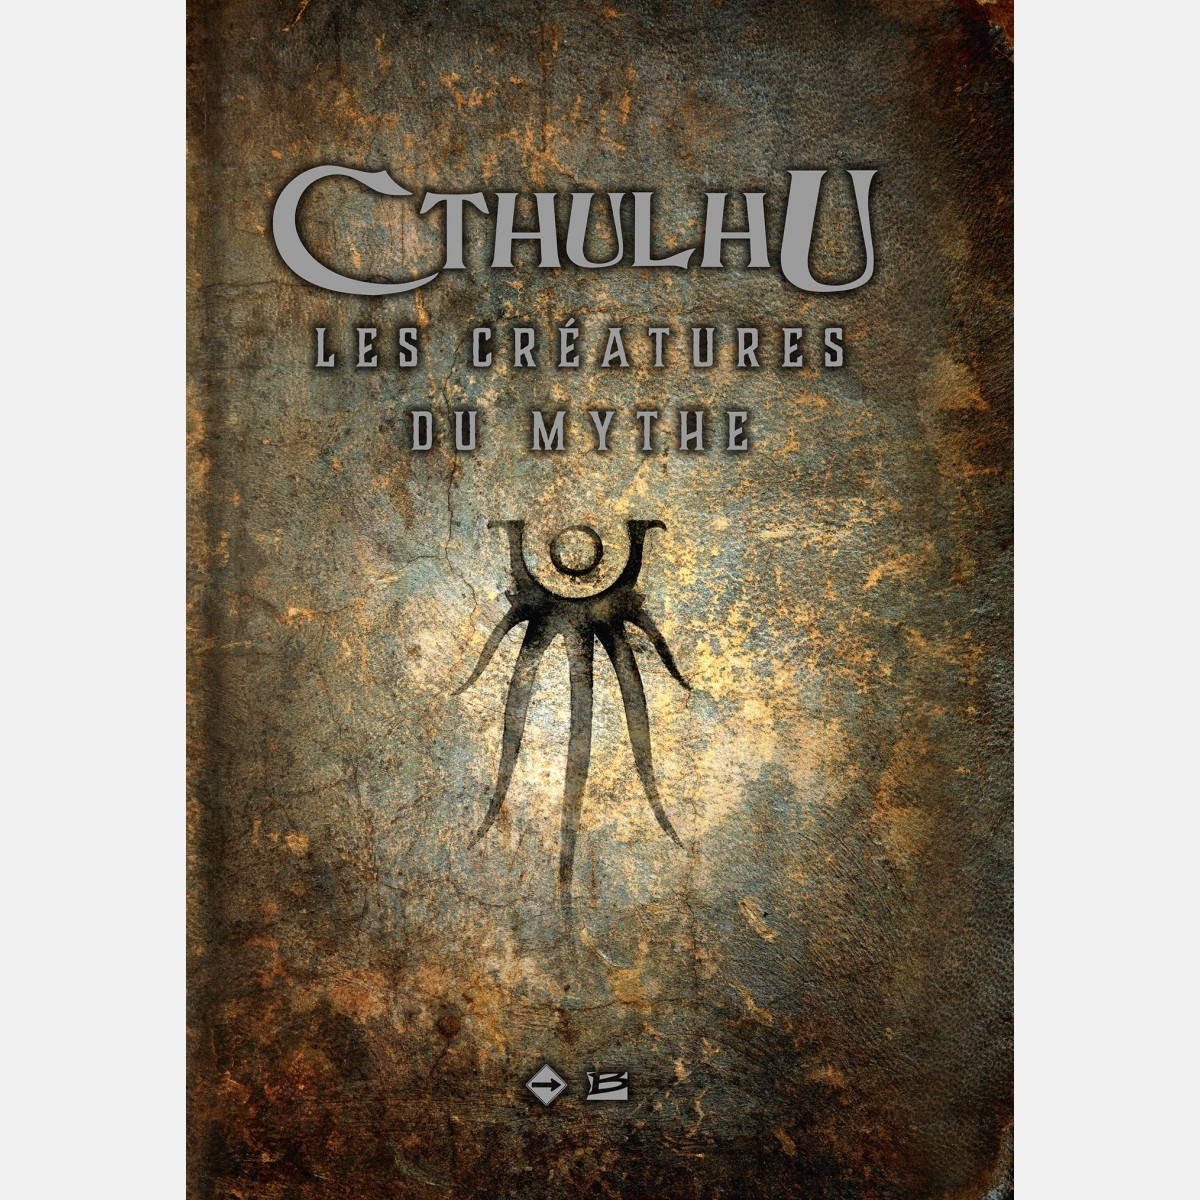 Cthulhu : Creatures of the Myth